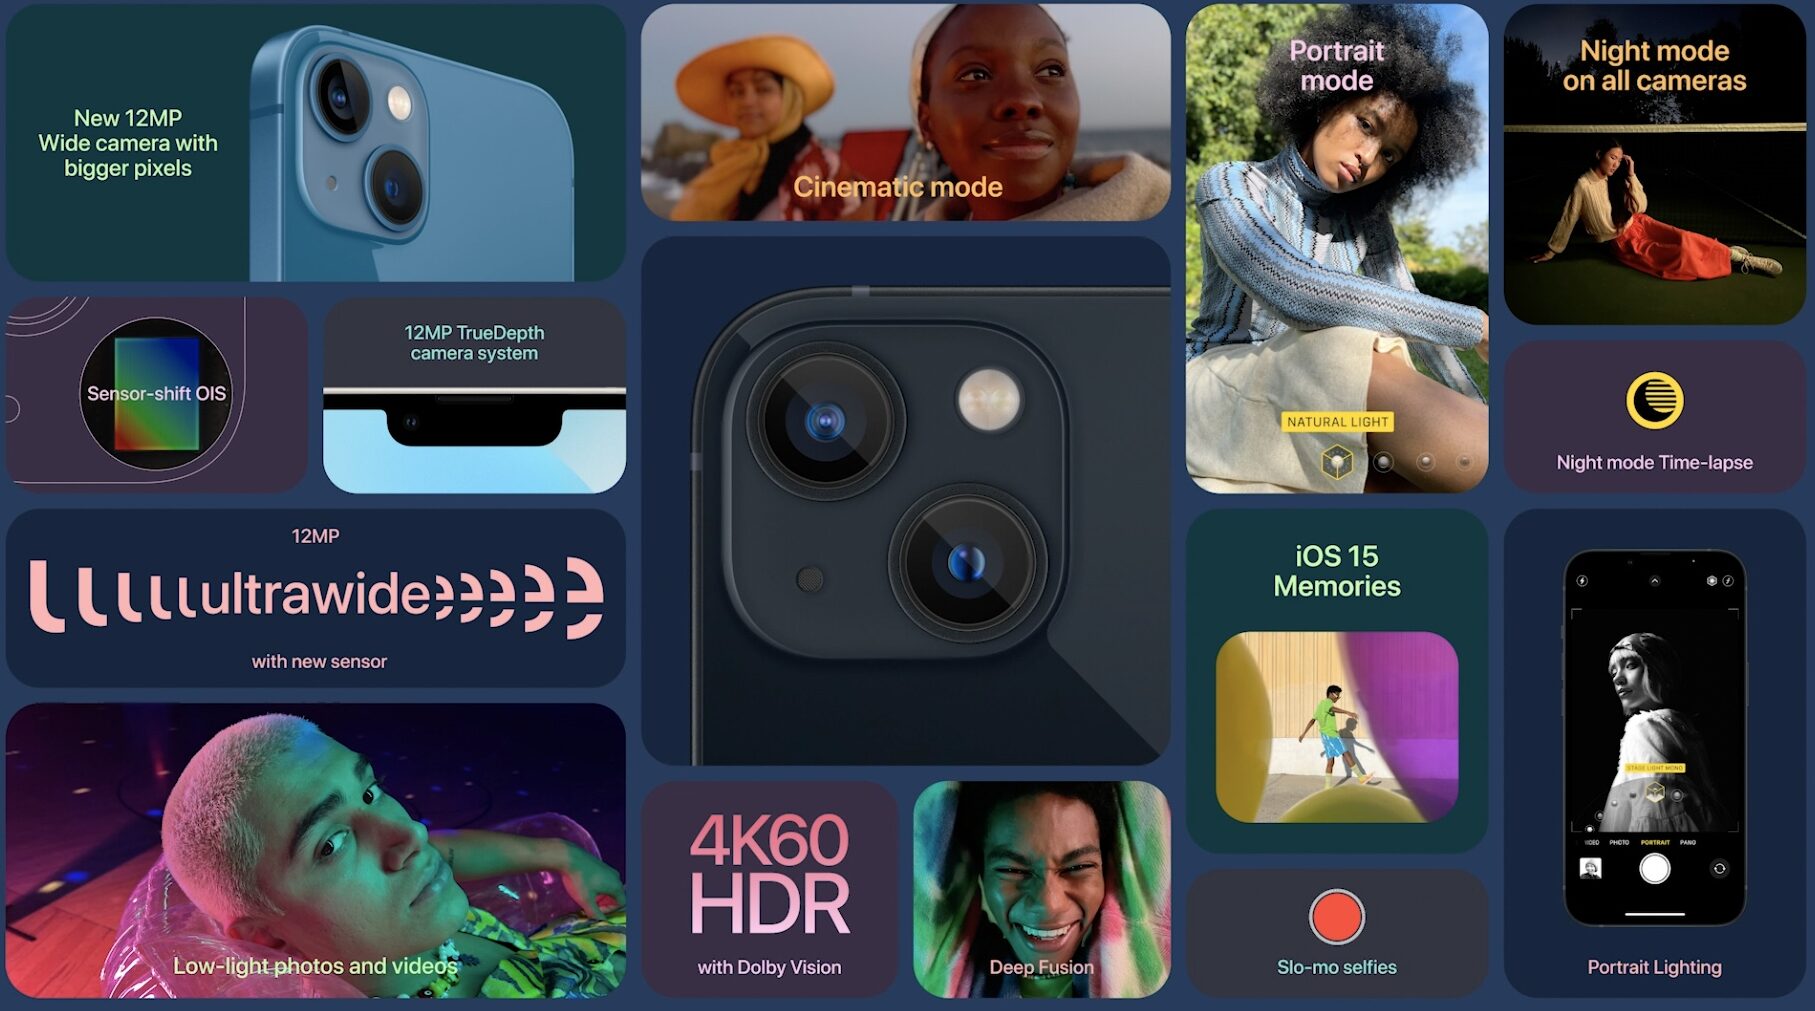 A slide from Apple's September 2021 “California streaming” event with boxes illustrating the various key features of the smartphone 